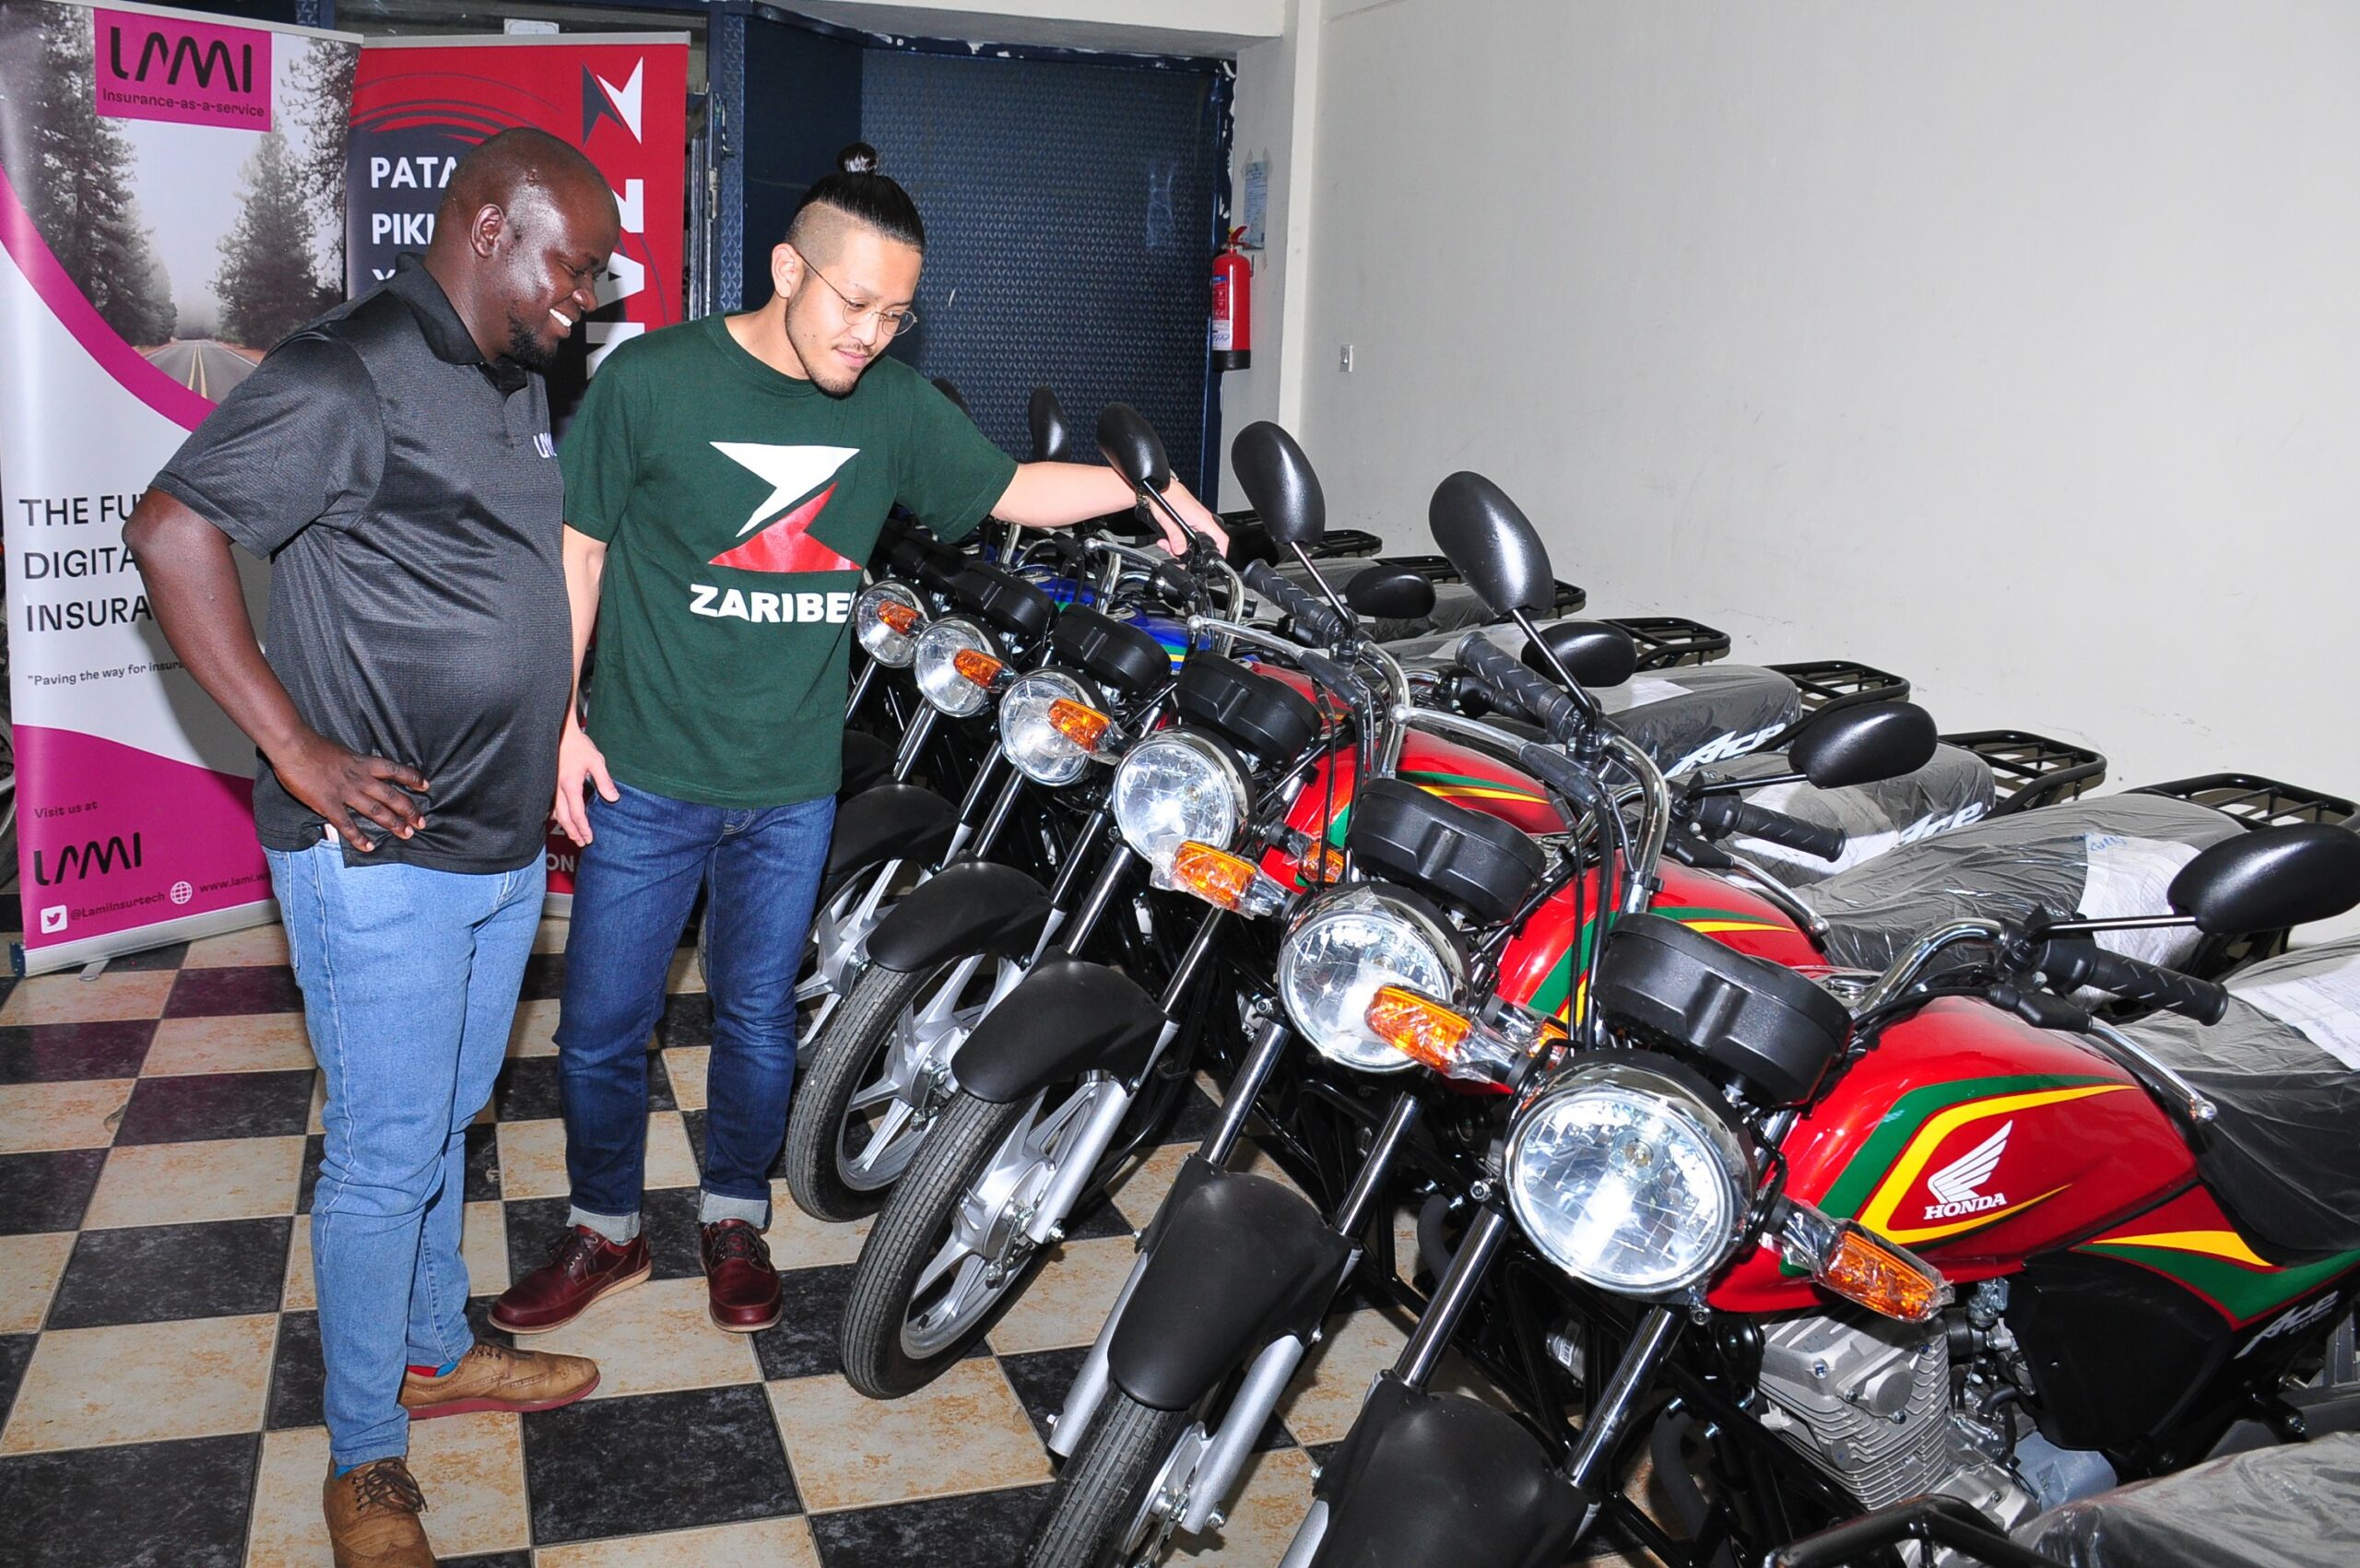 Through its partnership with Lami, UNK will now offer its riders protection with motorcycle insurance and personal accident cover which are essential to them.